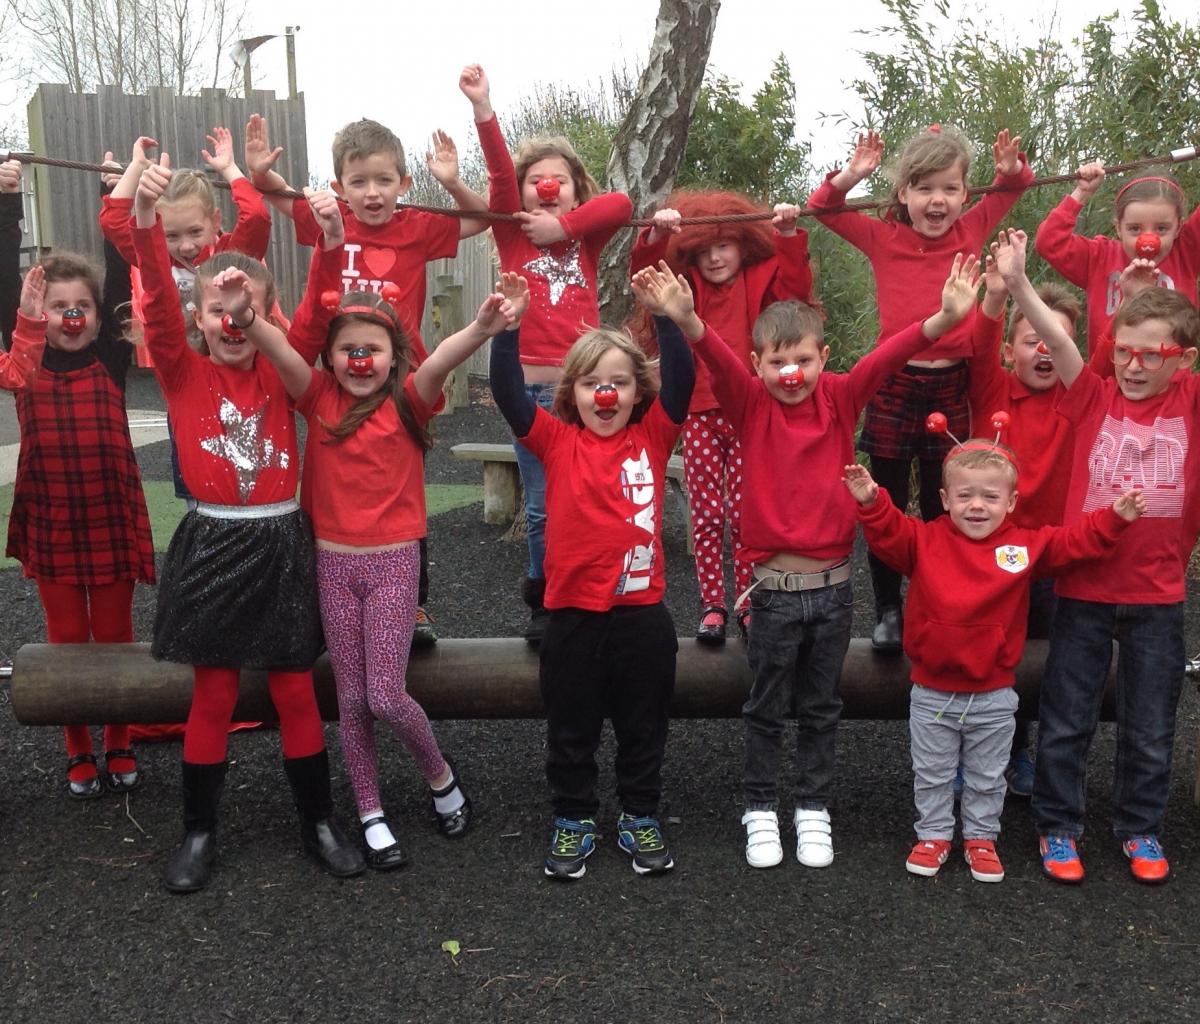 CHEERING: Pupils from Mark School celebrate Red Nose Day